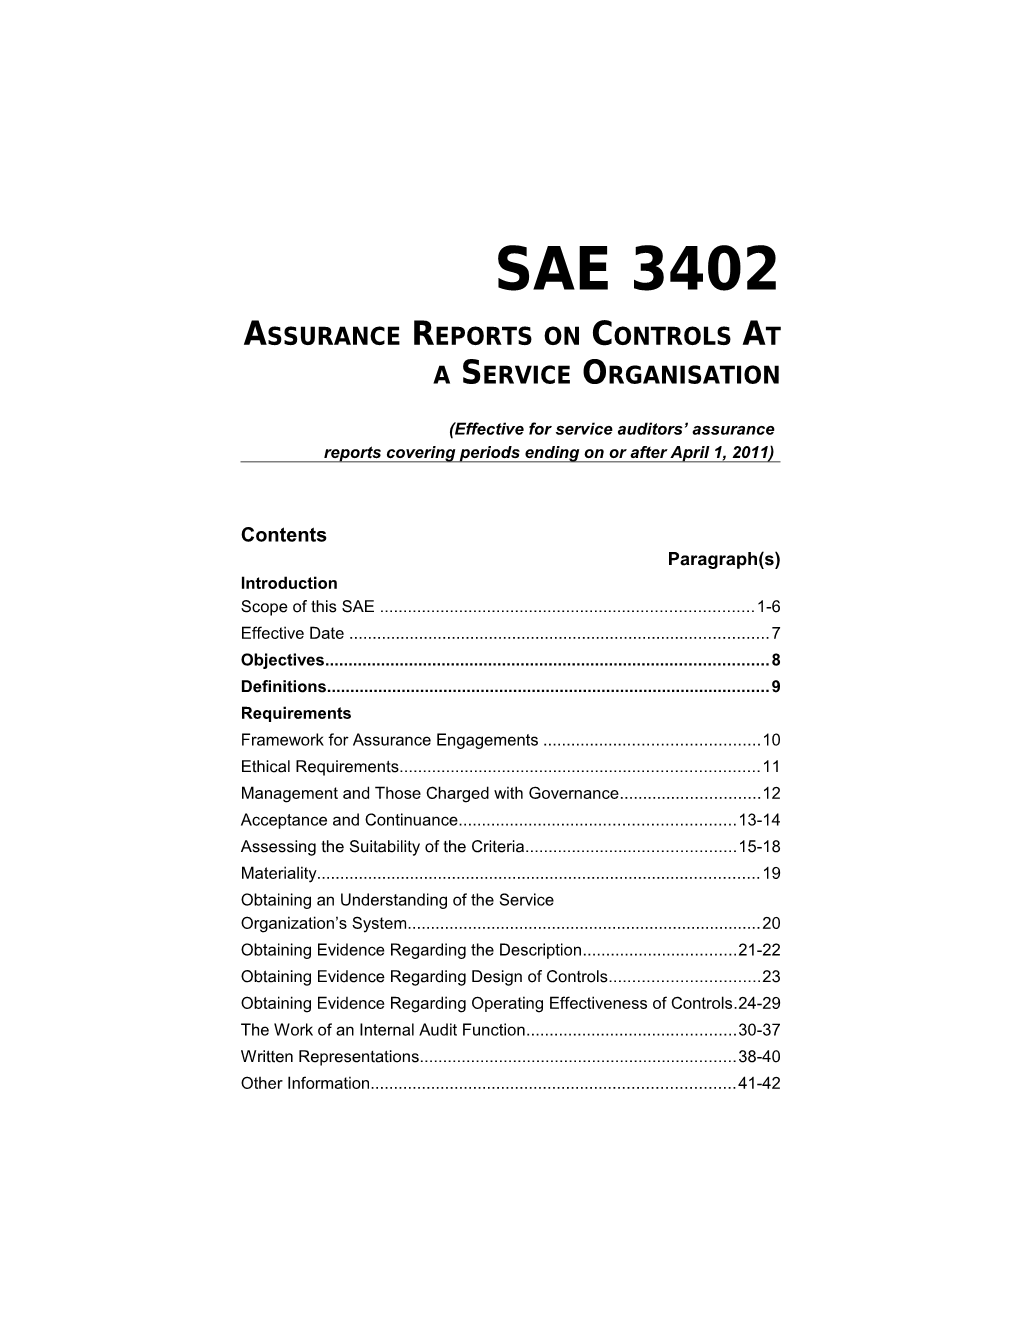 Assurance Reports on Controls at a Service Organization